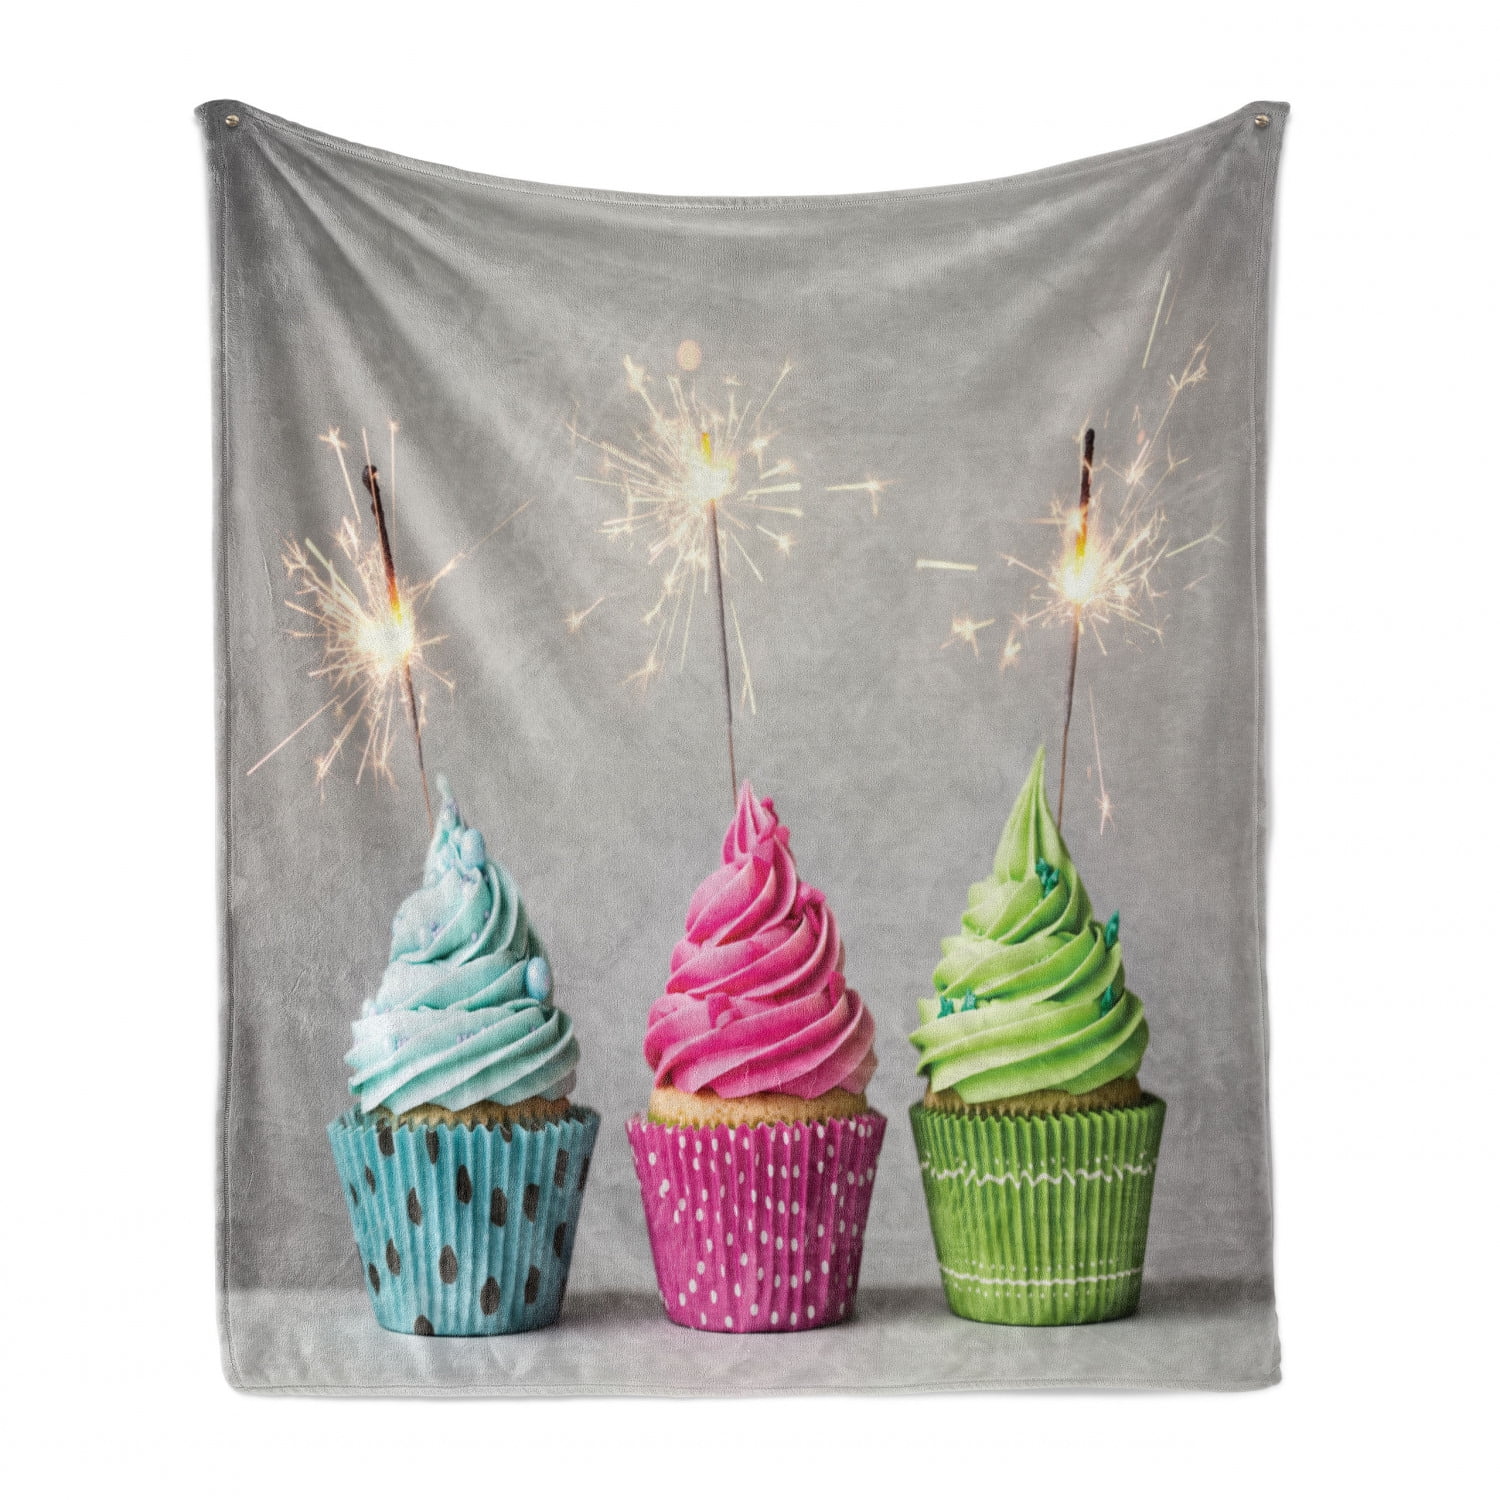 Deep Sky Blue Multicolor Dessert Celebration Baking Related Cupcake Colorful Candles 50 x 60 Cozy Plush for Indoor and Outdoor Use Ambesonne Birthday Party Soft Flannel Fleece Throw Blanket 